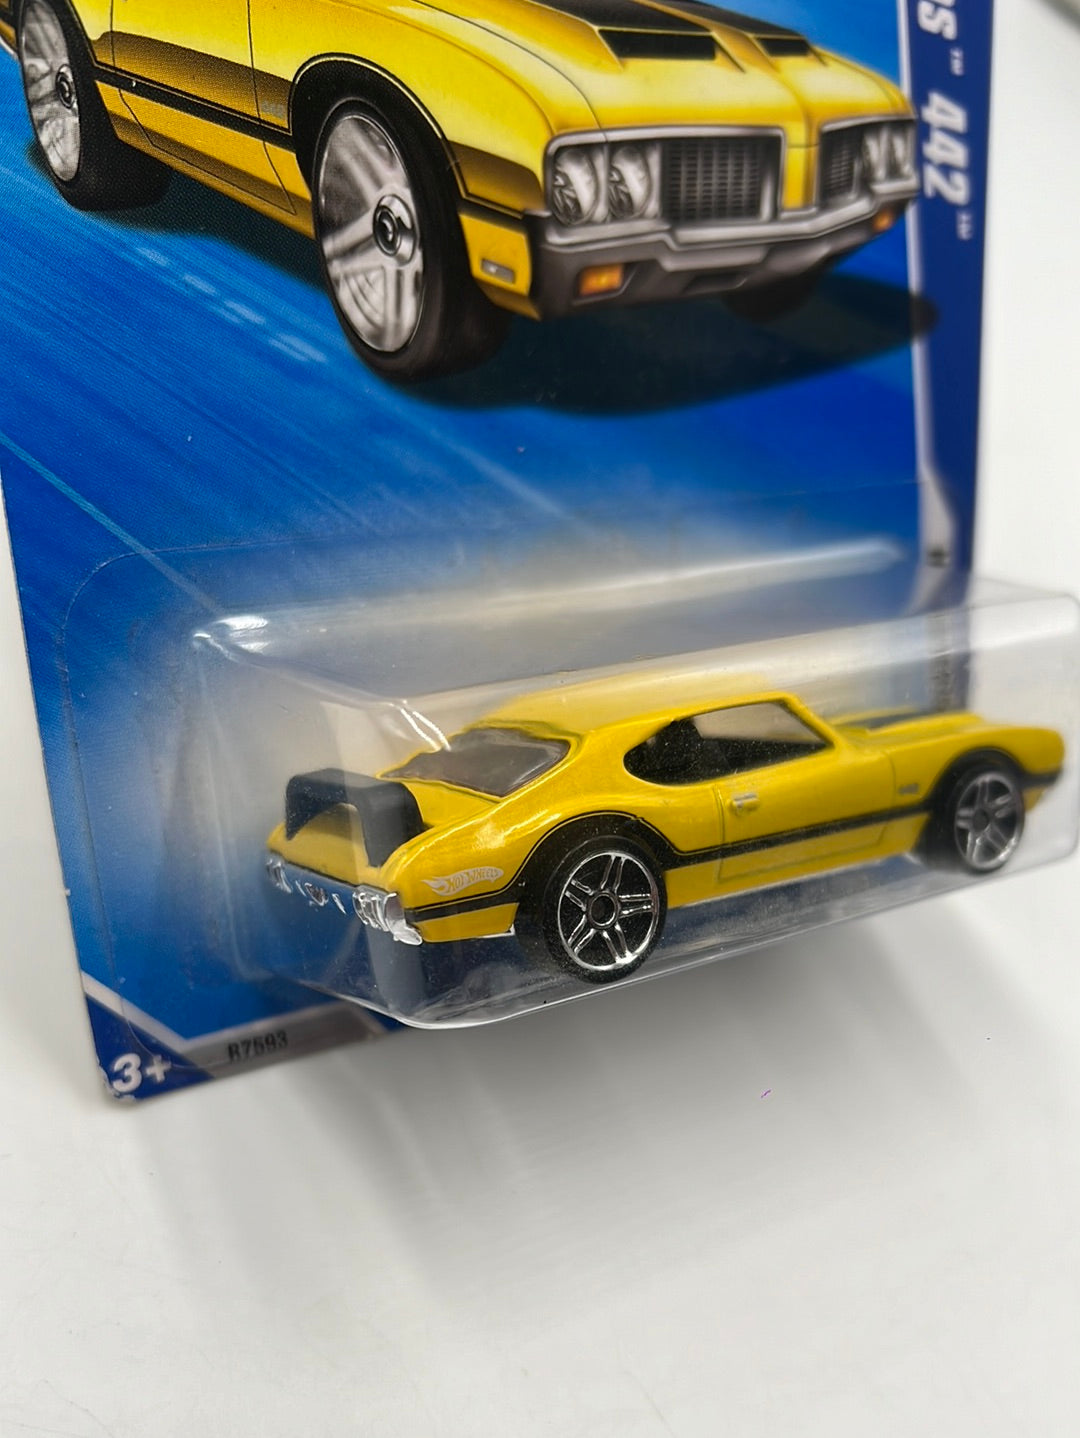 2010 Hot Wheels Hot Auction Olds 442 Yellow 168/240 57A